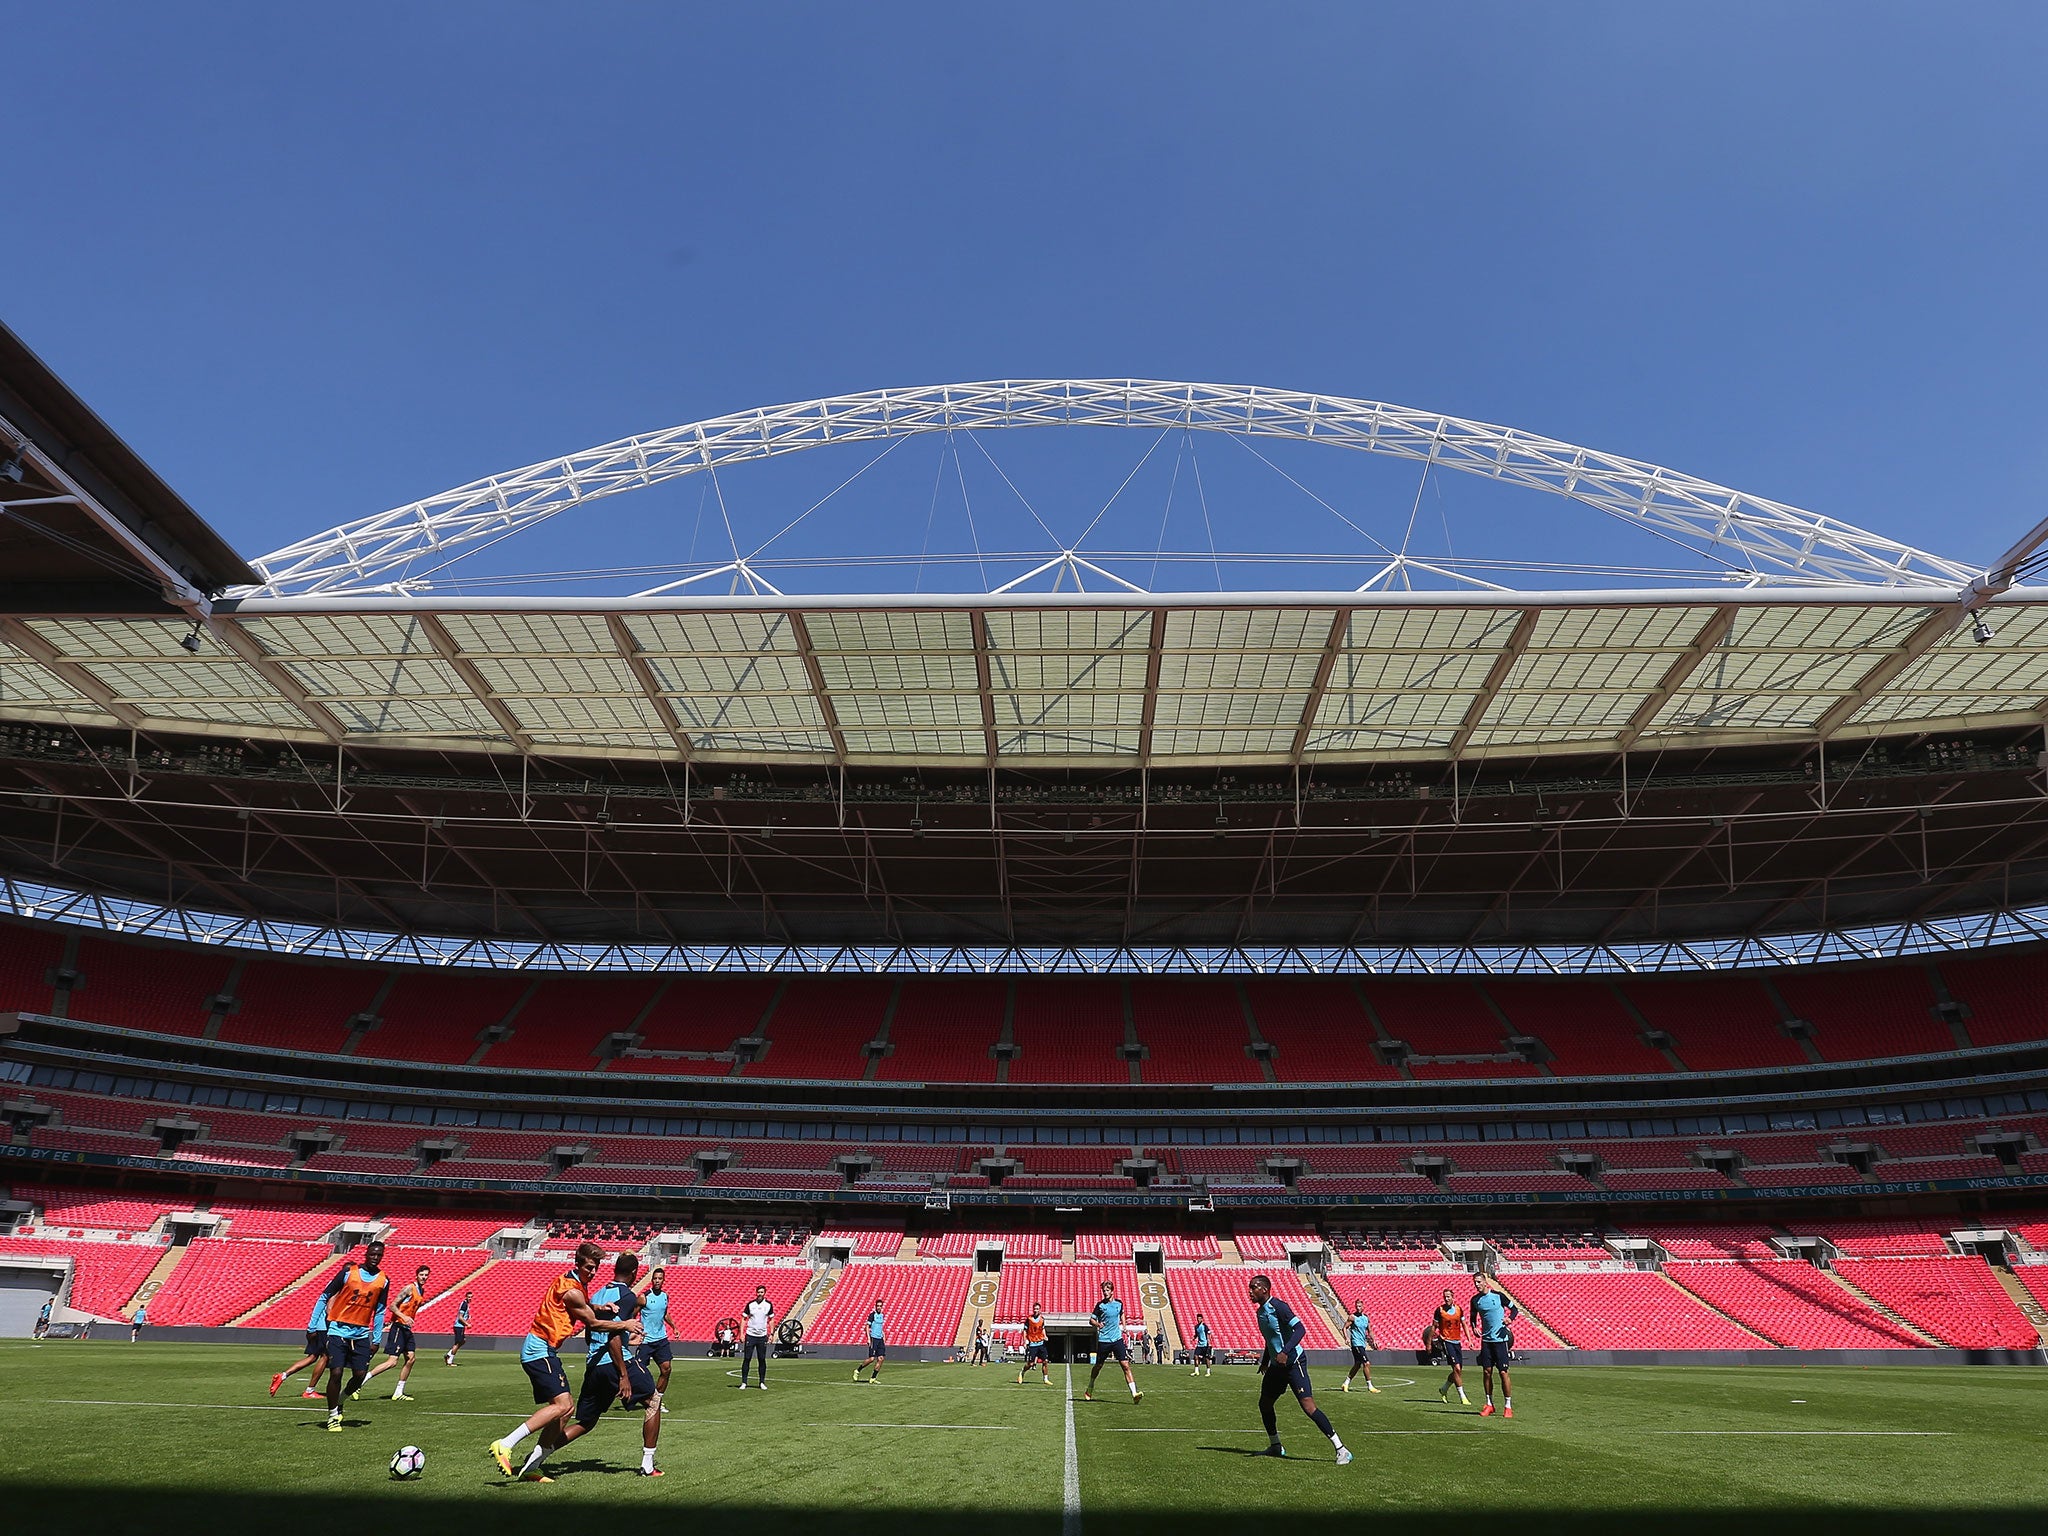 Tottenham's players will be gifted with plenty of space on the Wembley pitch